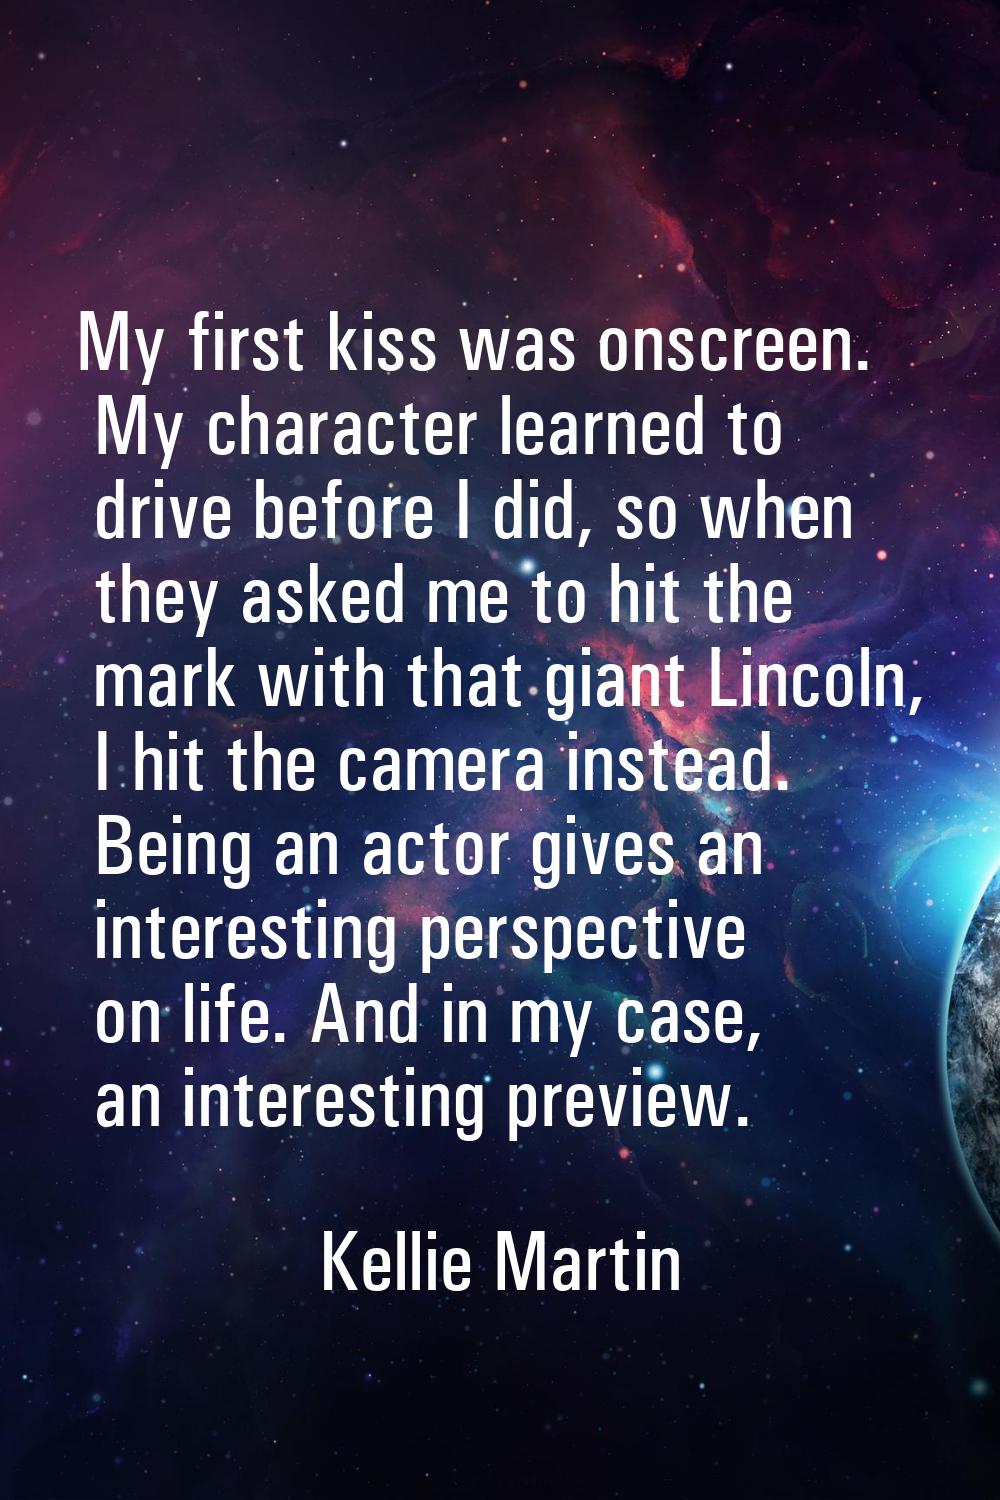 My first kiss was onscreen. My character learned to drive before I did, so when they asked me to hi